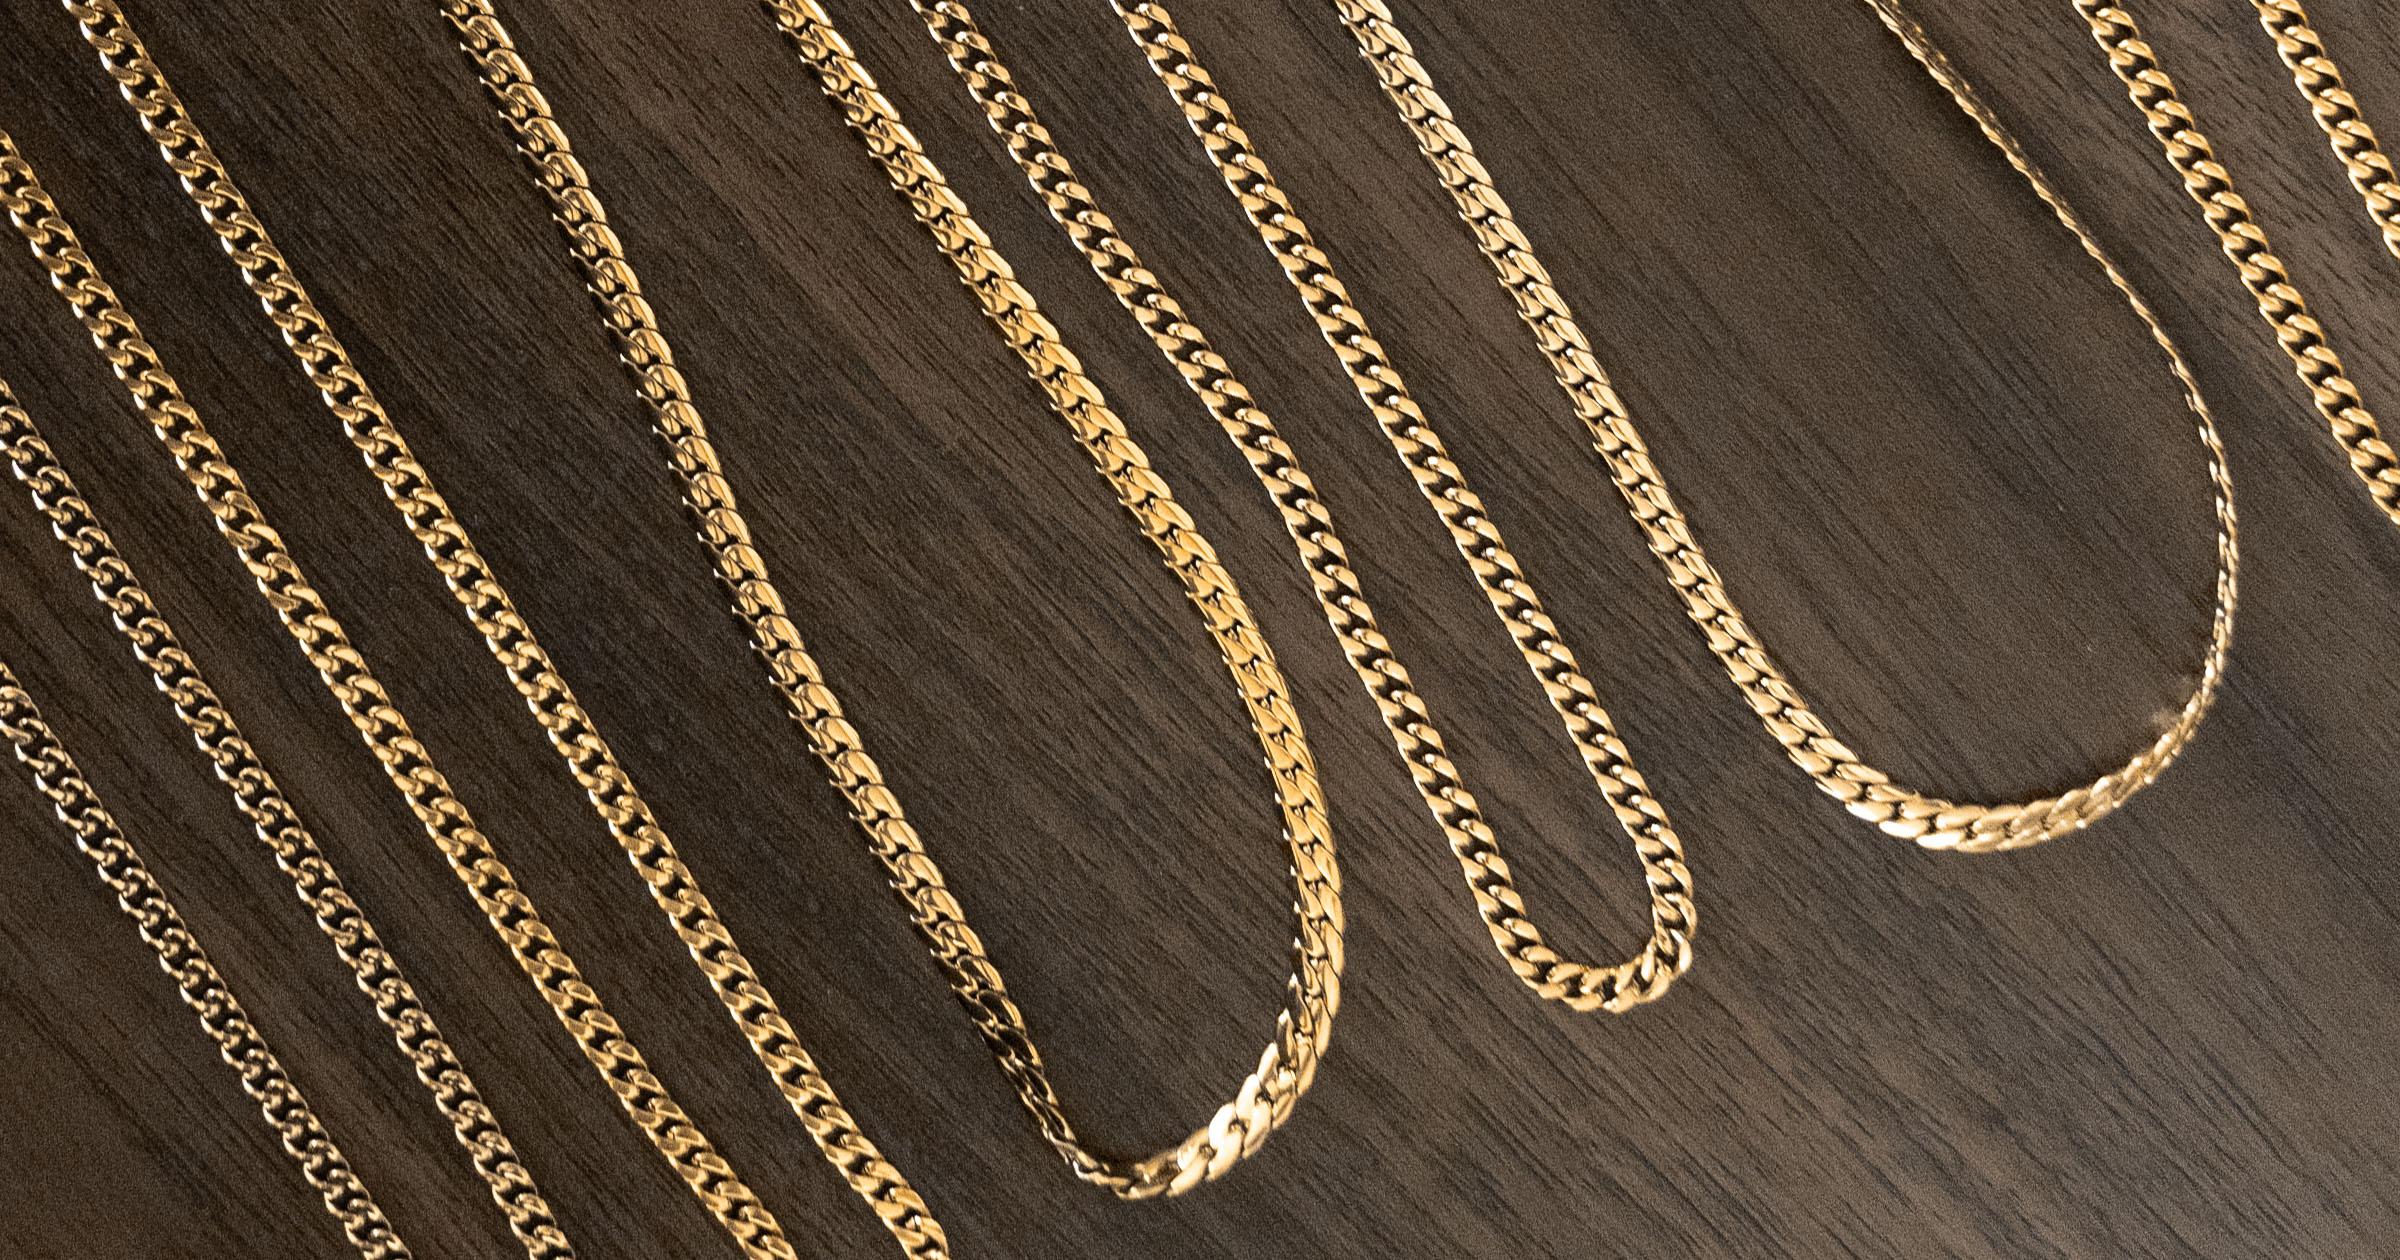 a few hollow vs solid gold chains laid out on a wood table